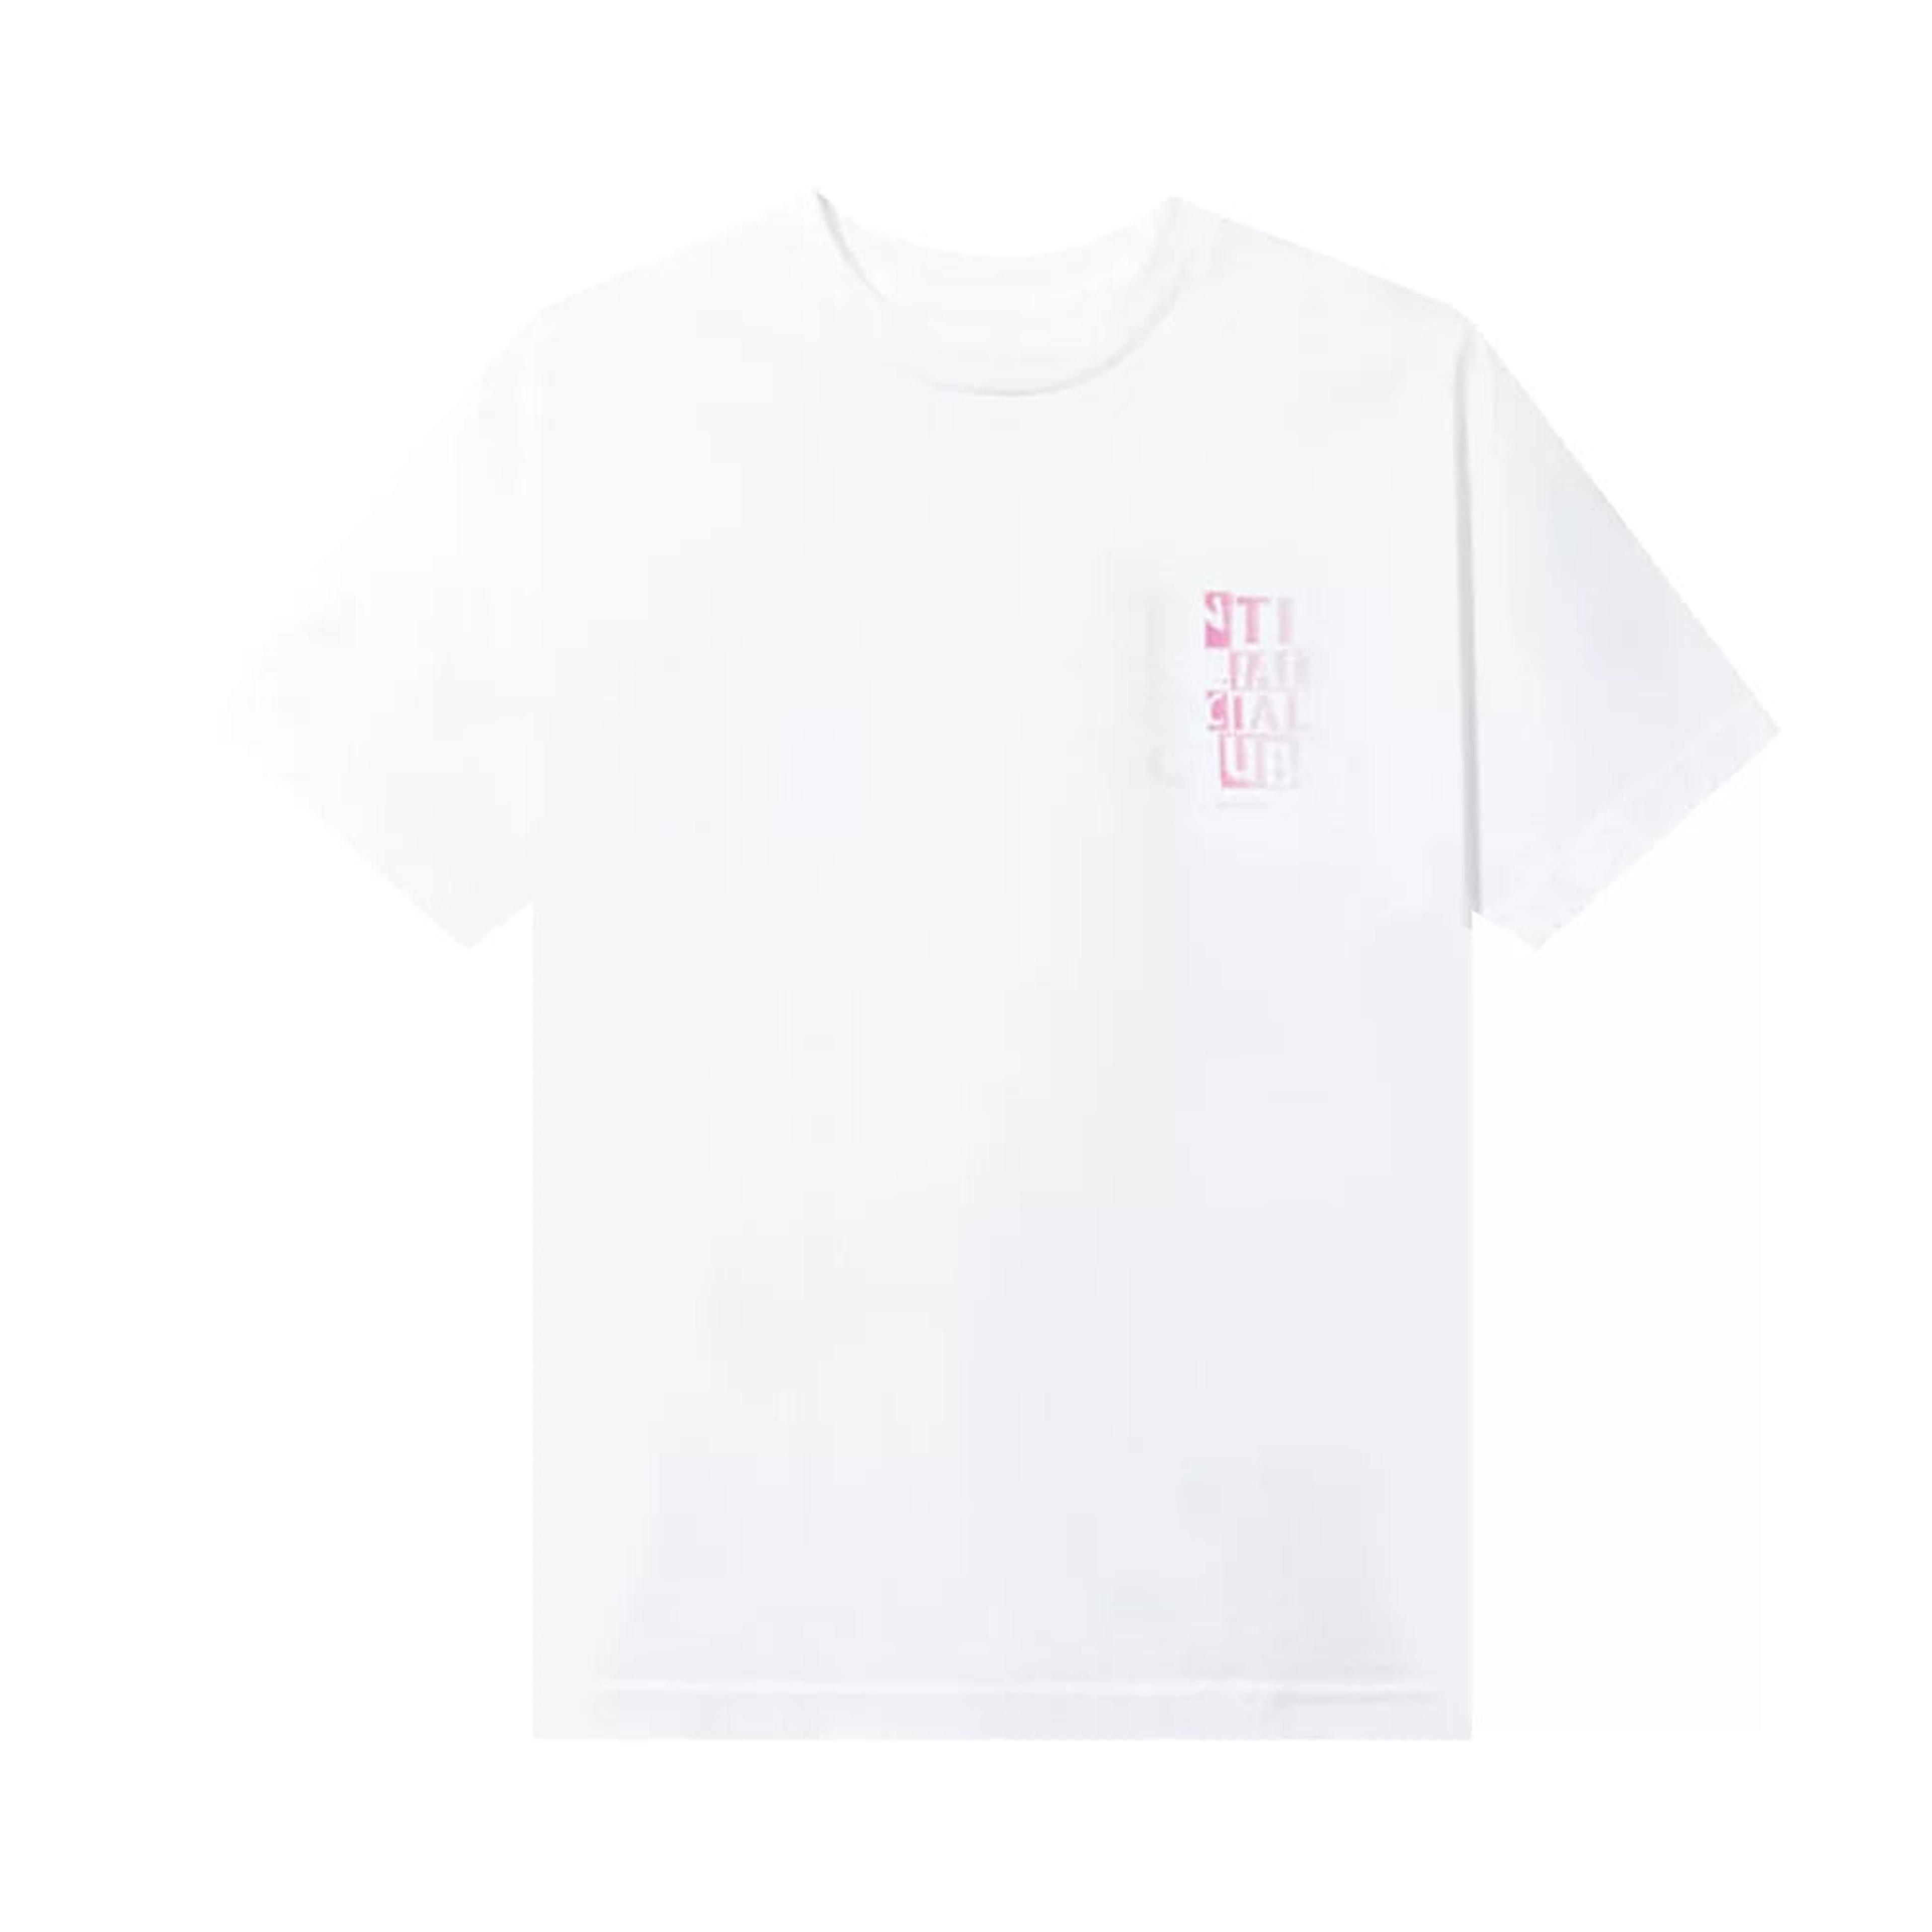 Alternate View 1 of Anti Social Social Club Muted White Tee ASSC DS Brand New